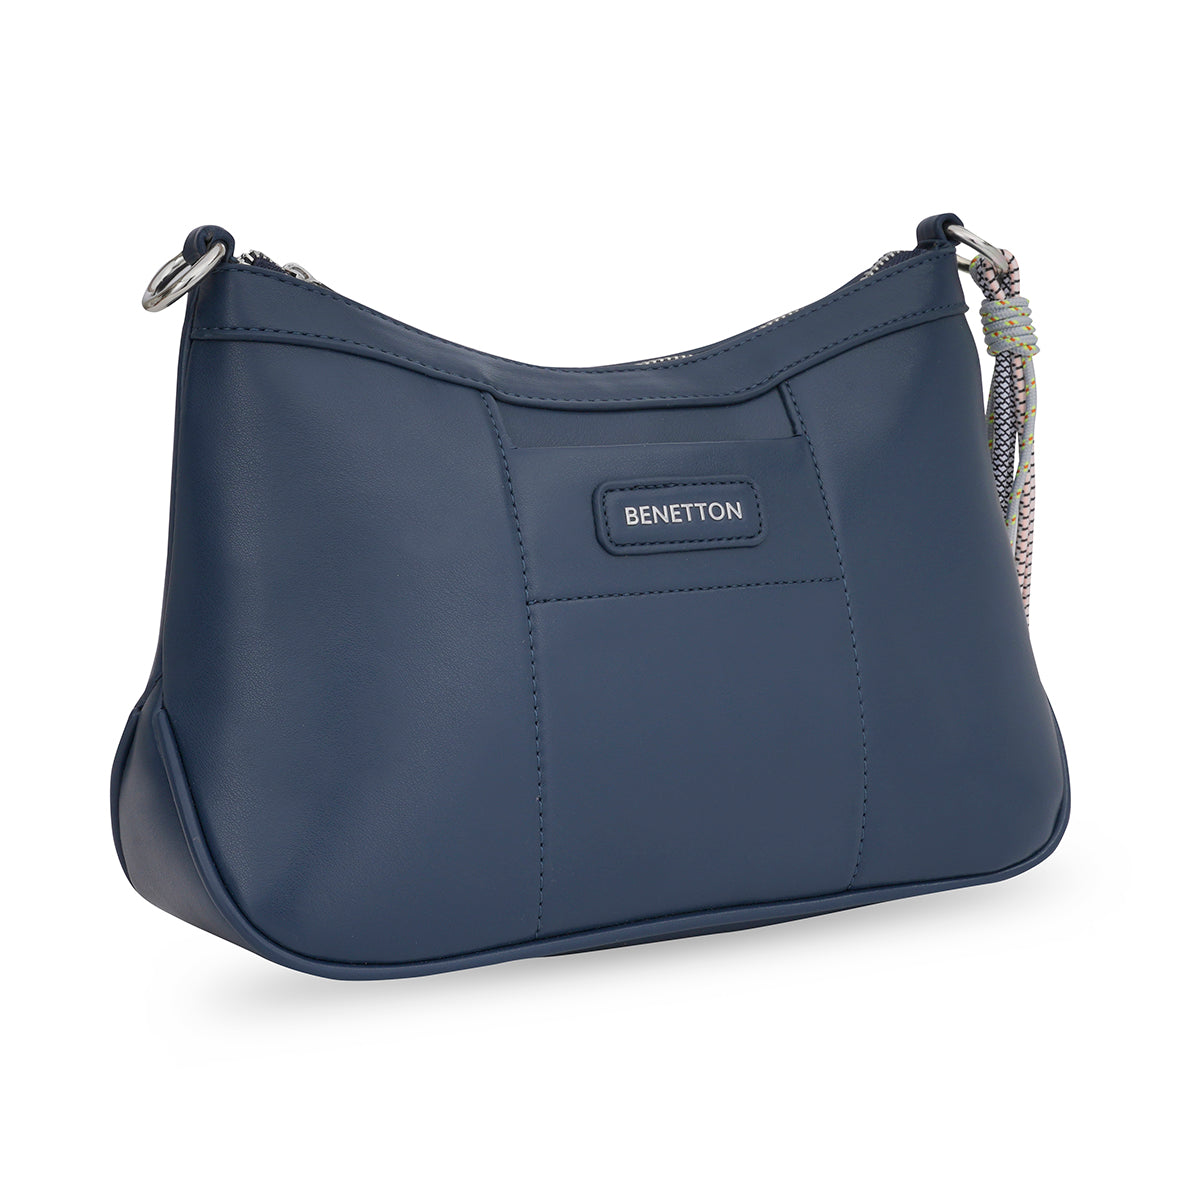 United Colors of Benetton Evelin Baguette Navy